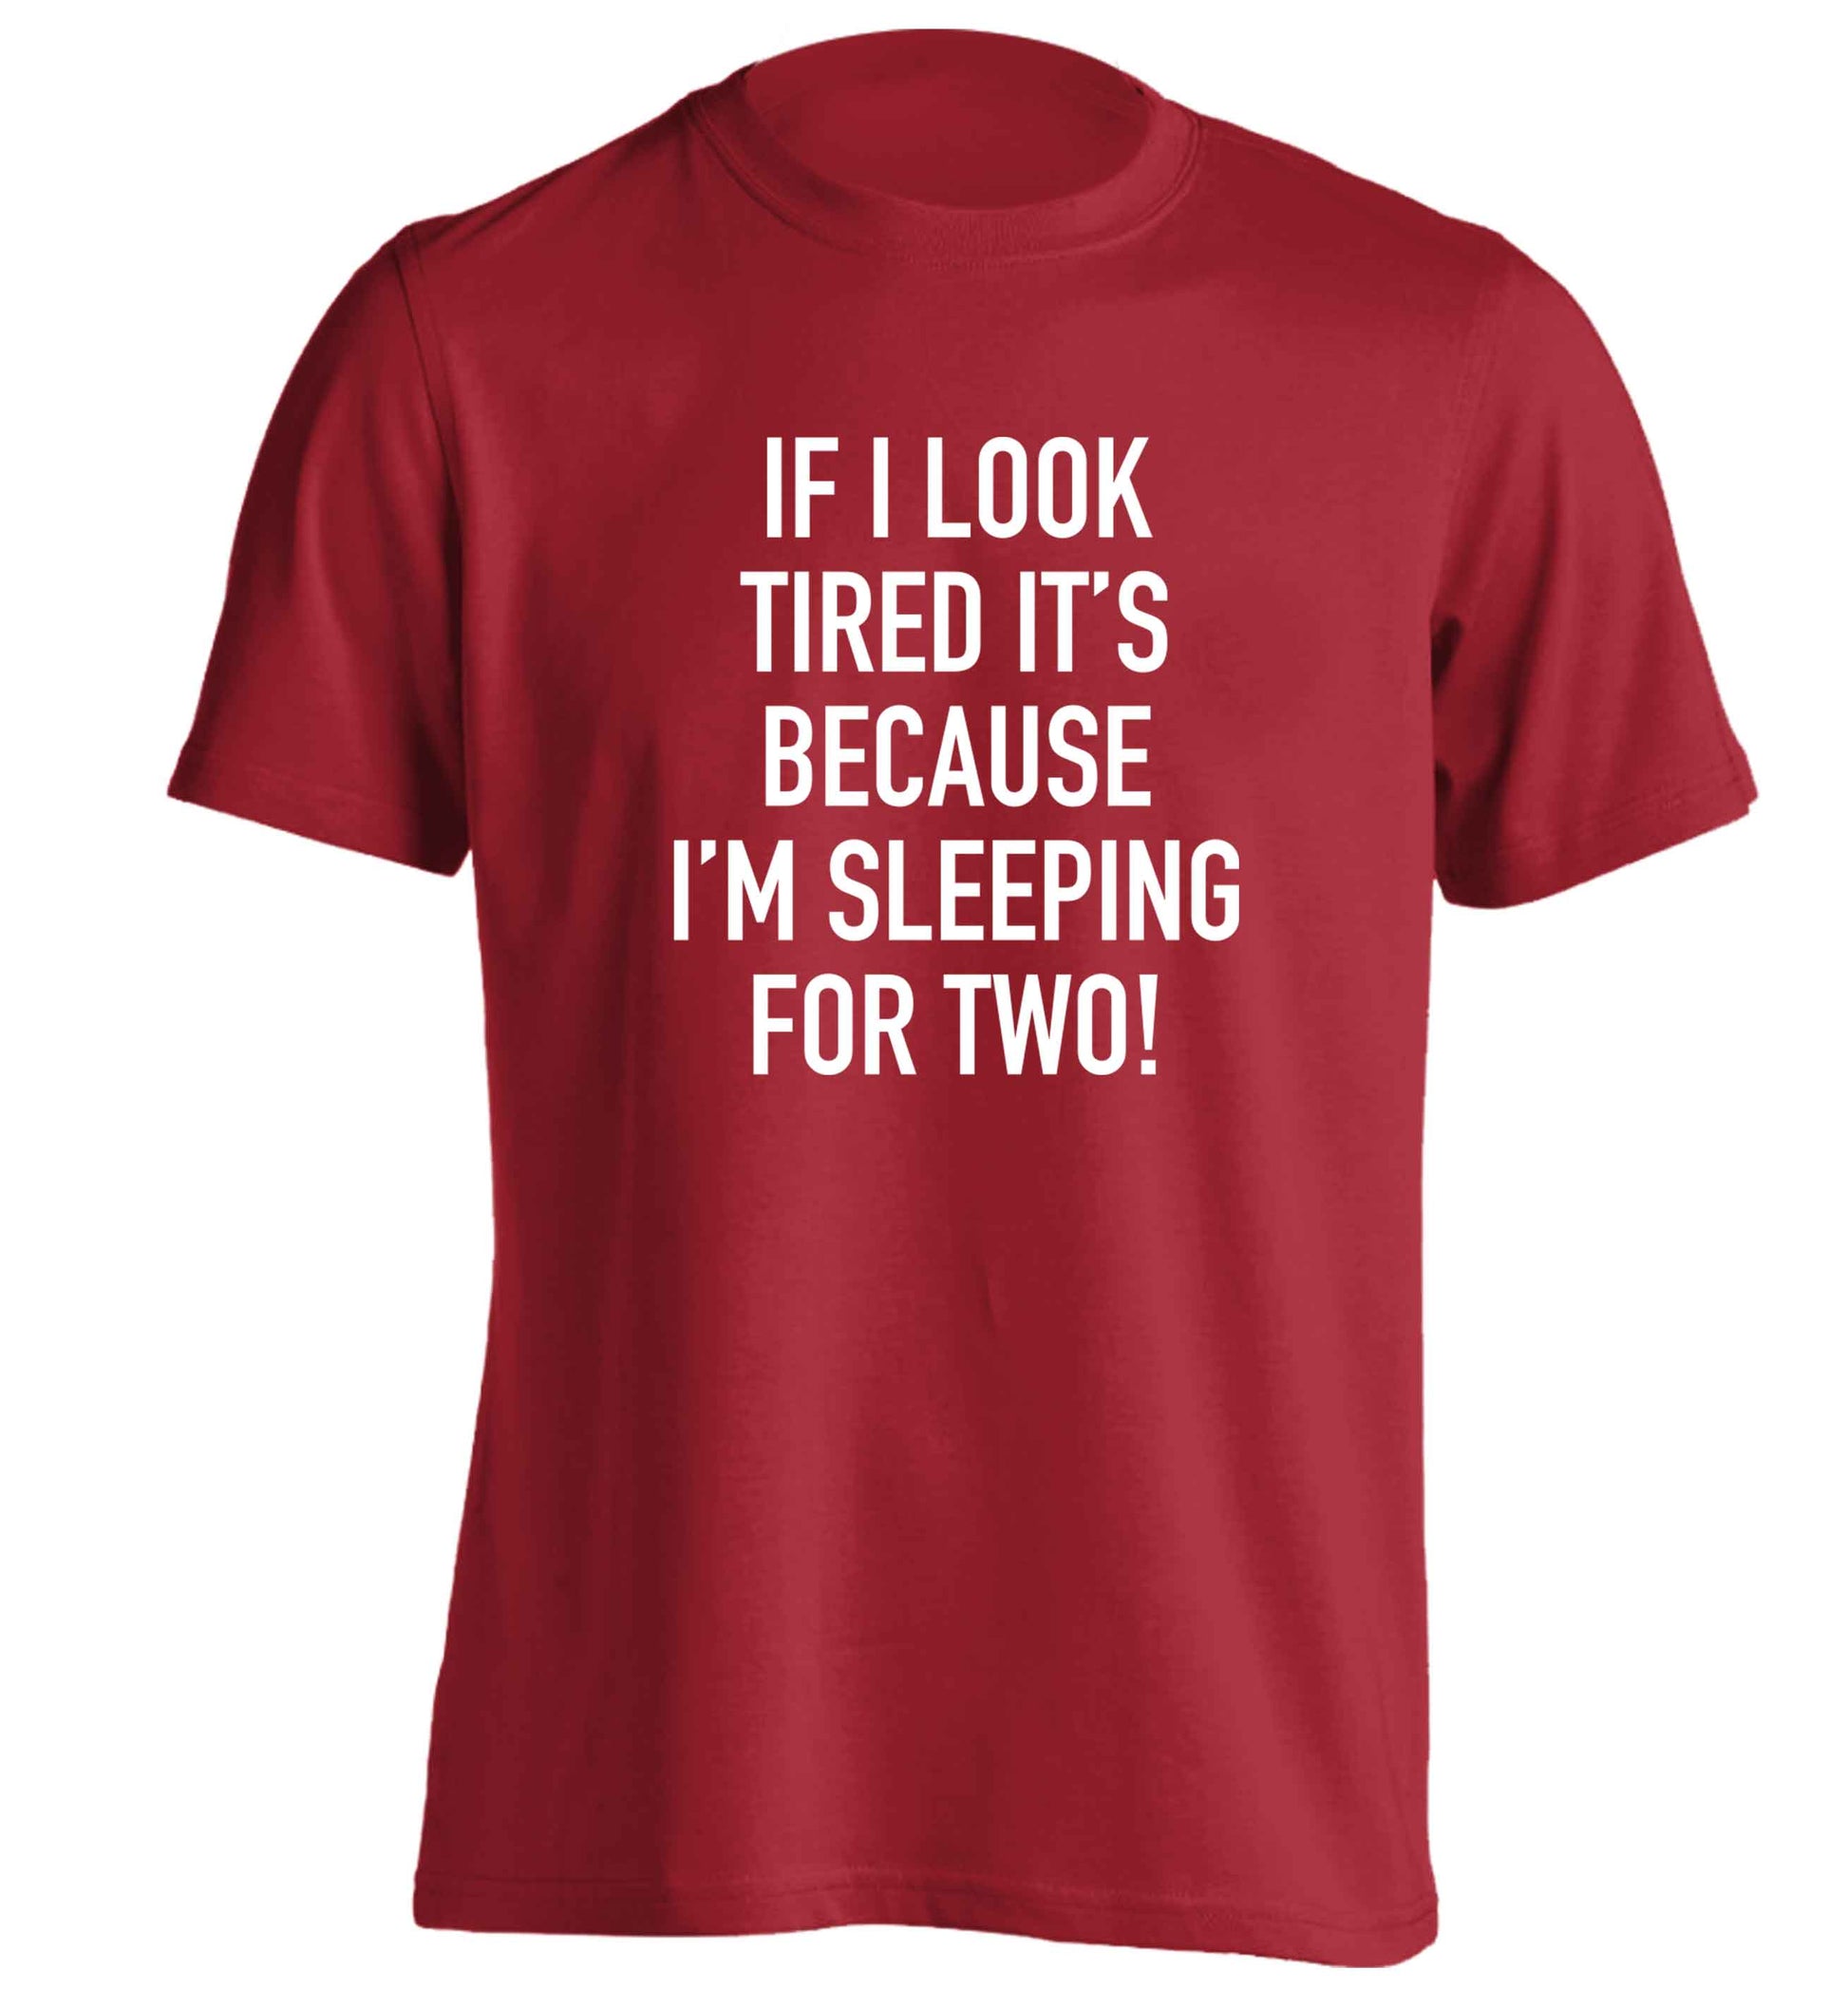 If I look tired it's because I'm sleeping for two adults unisex red Tshirt 2XL